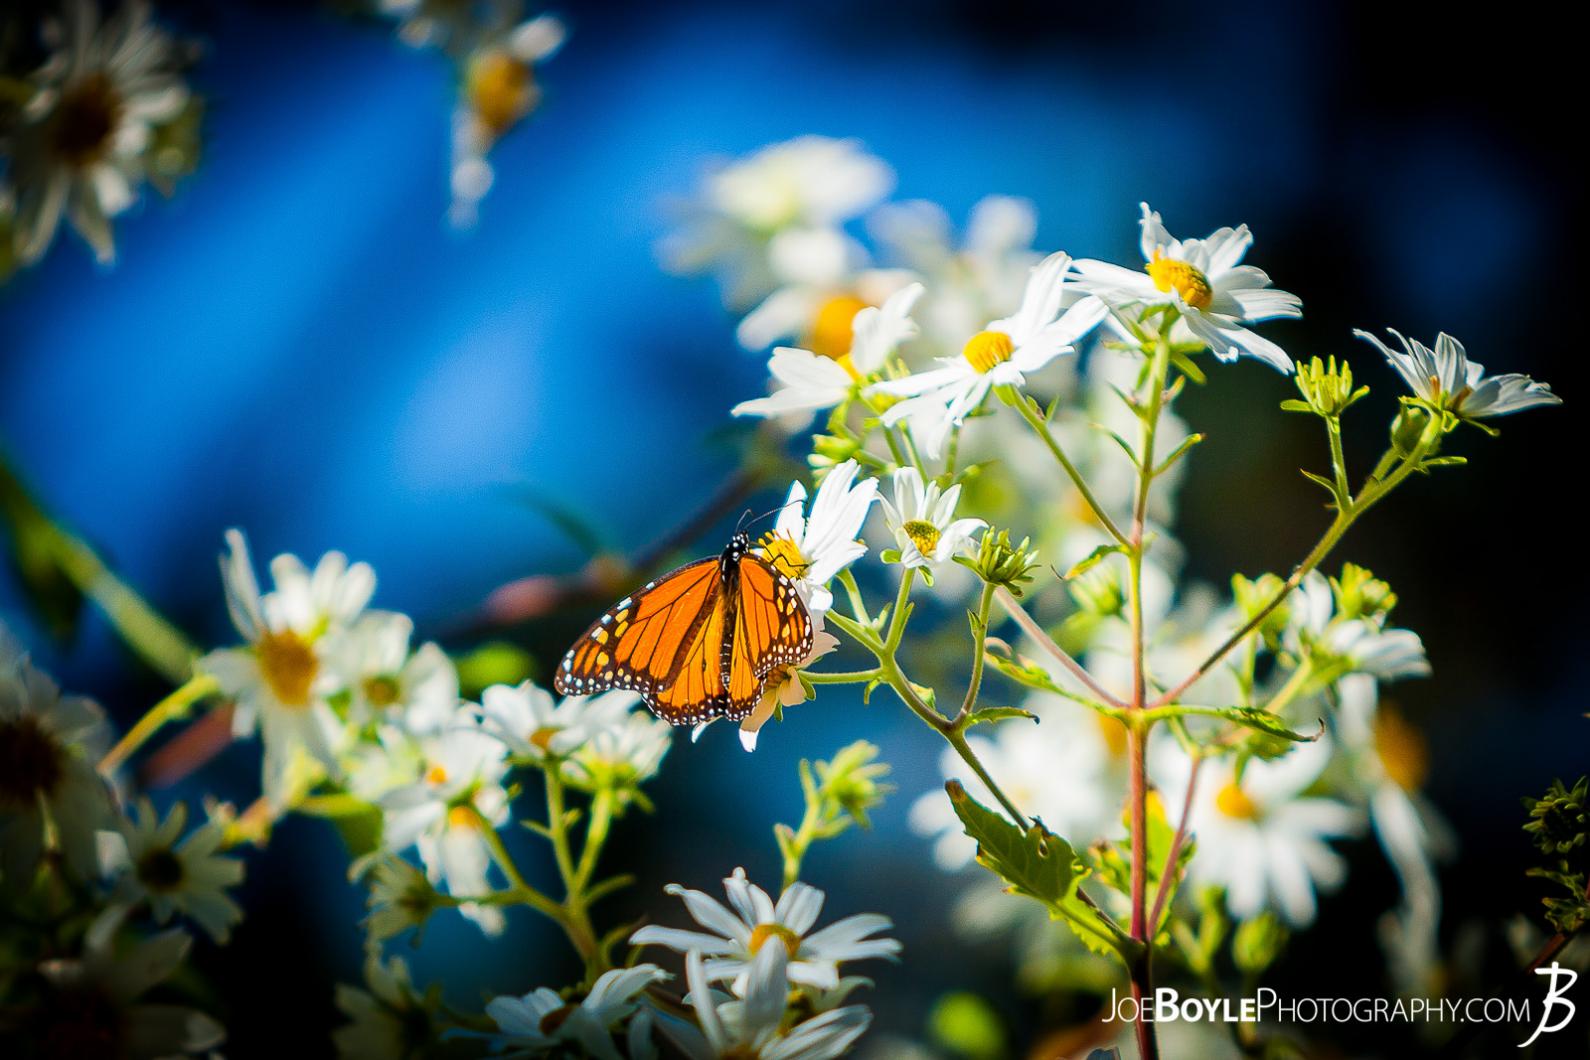 Butterfly on White Daisies, Monarch Grove Butterfly Sanctuary.